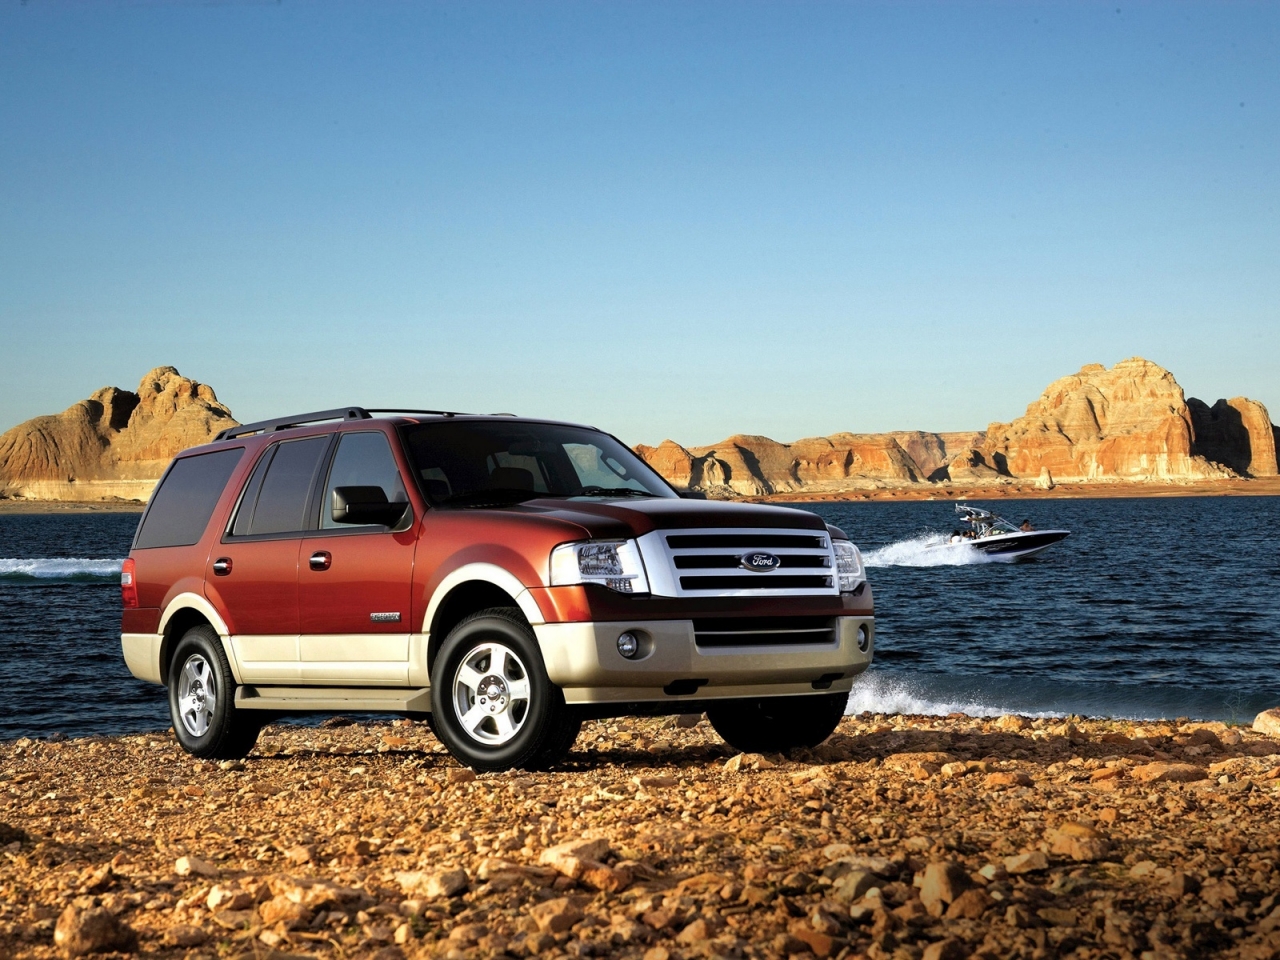 2010 Ford Expedition for 1280 x 960 resolution